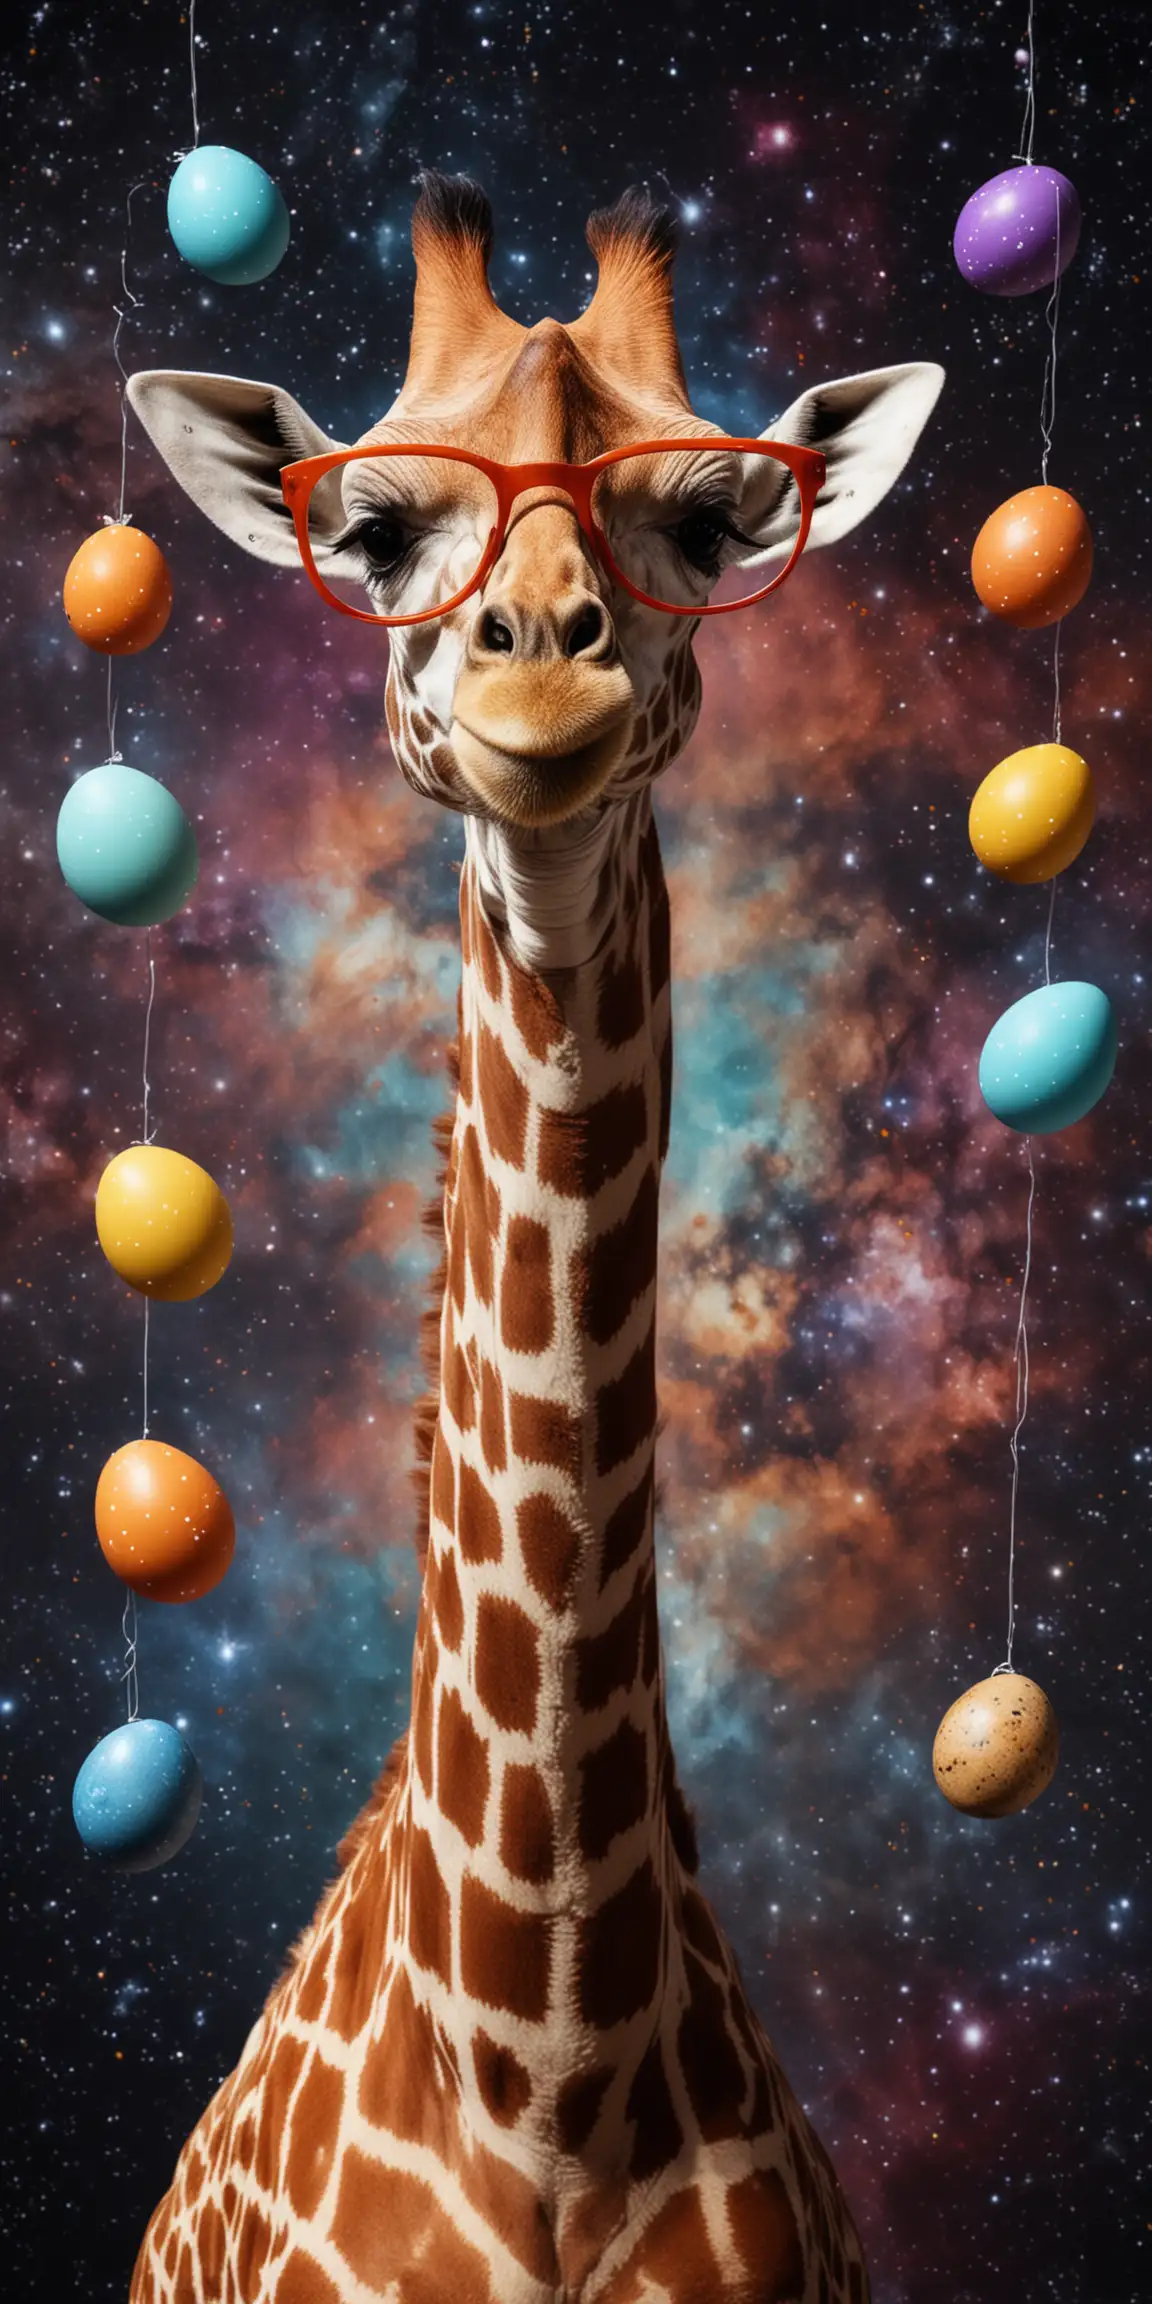 Giraffe Wearing Glasses Surrounded by Space and Easter Eggs